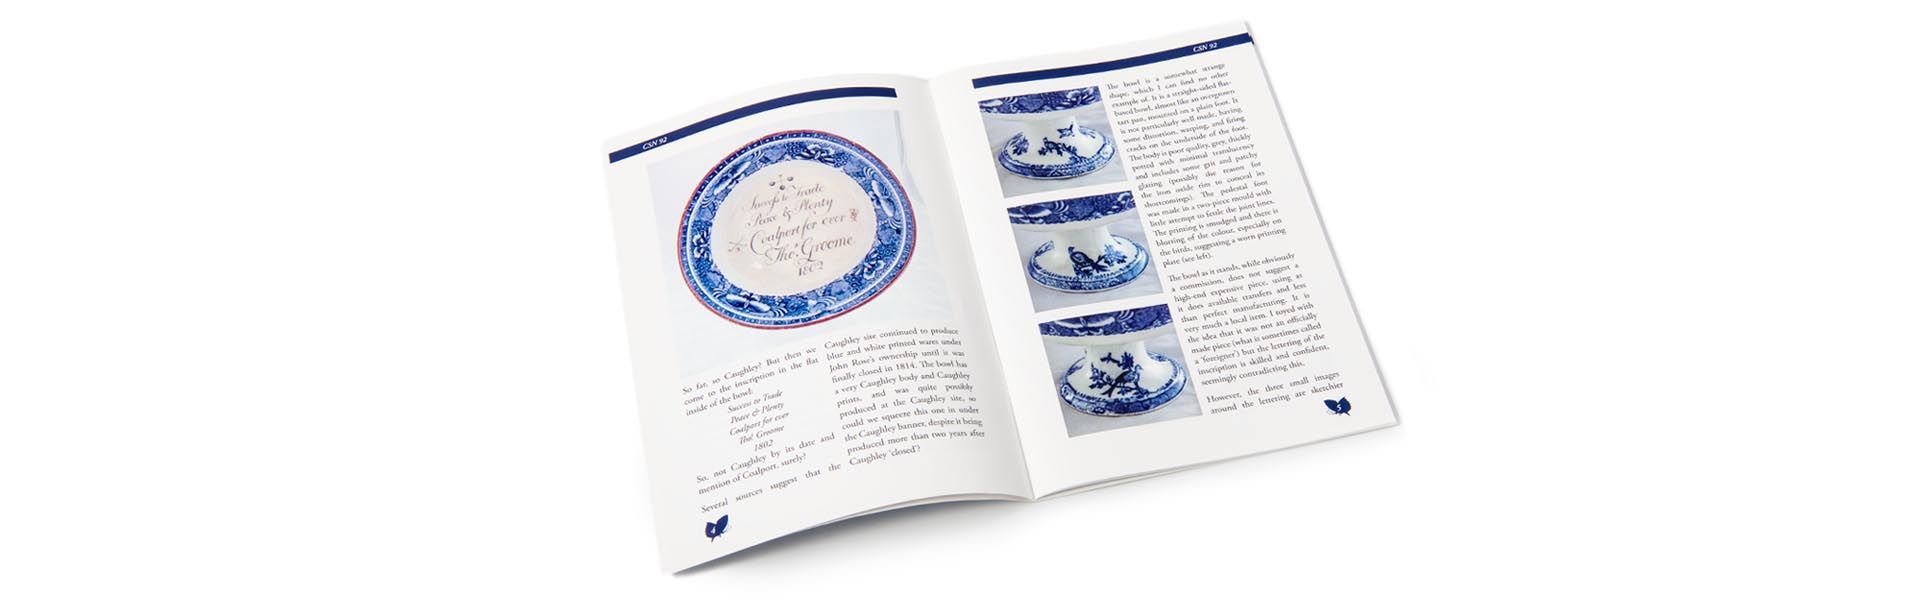 a copy of the caughley society newsletter is open to a page with a picture of a blue and white plate